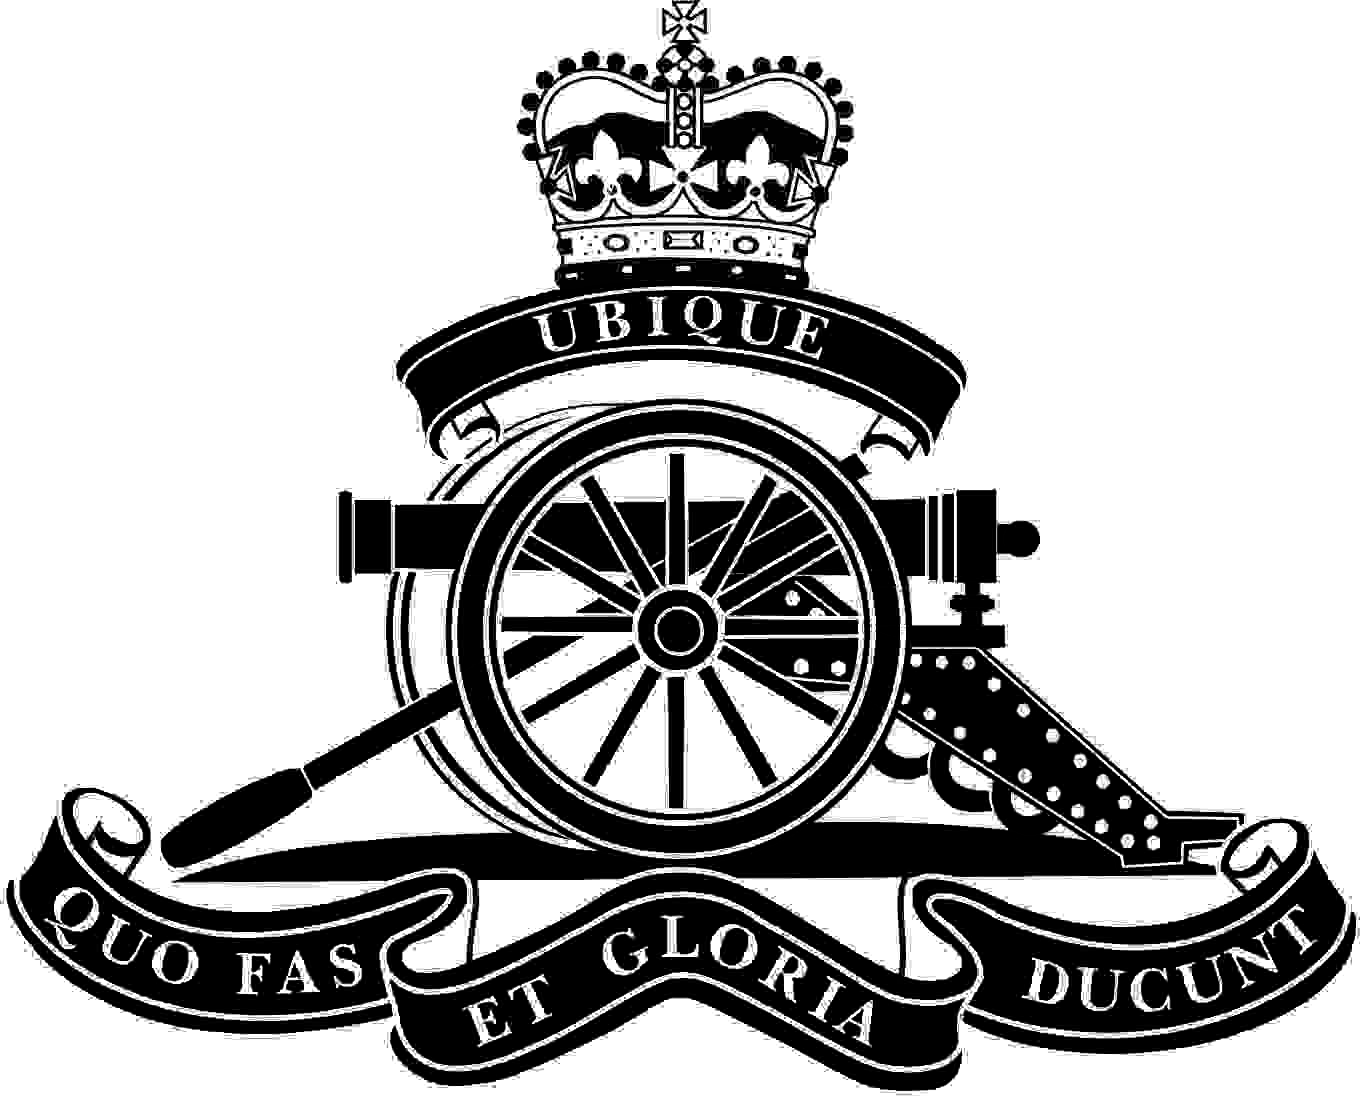 The badge of the Royal Artillery is a cannon with a ribbon above and below with the words Ubique above and Quo Fas Et Gloria Ducunt Below all topped by a crown. My impression of the badge of the badge of the Royal Artillery. Please note that all that is black is engraved onto the glass. 